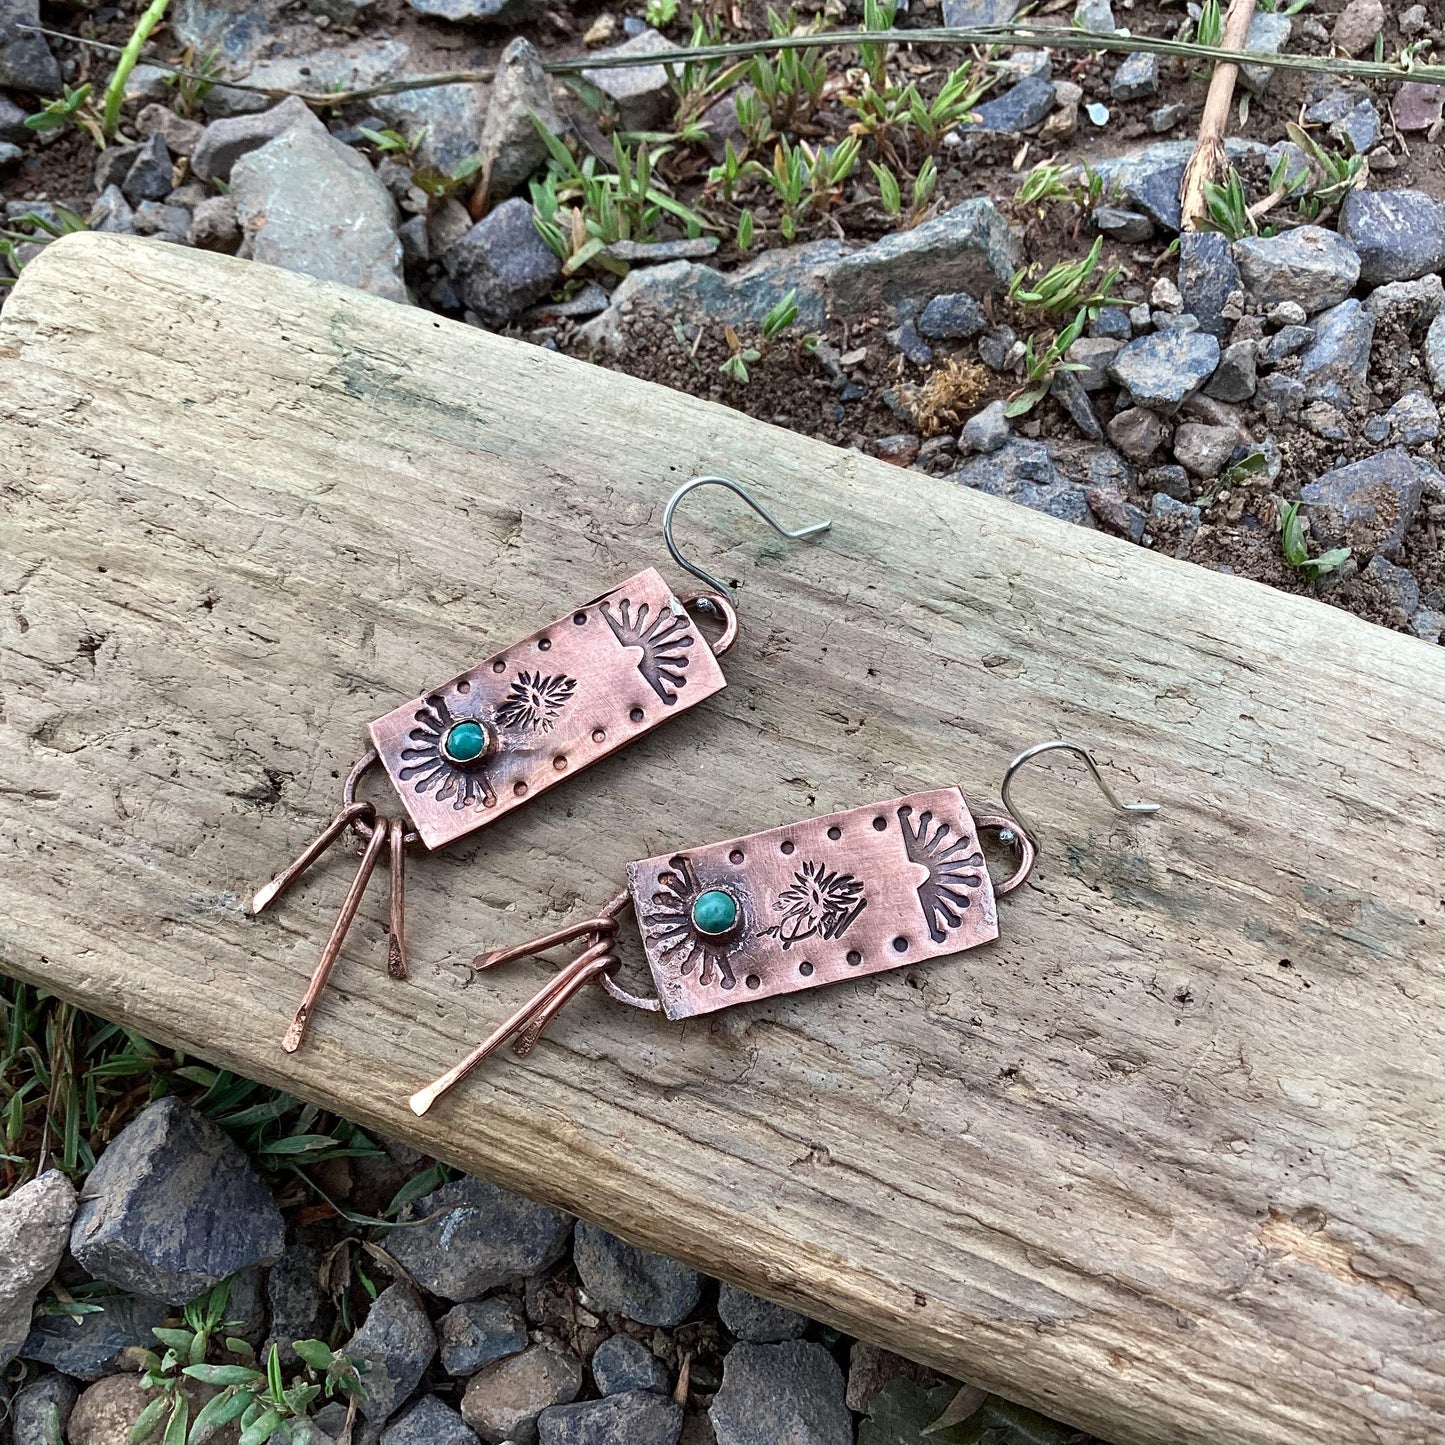 Copper, Sterling Silver and Turquoise Earrings